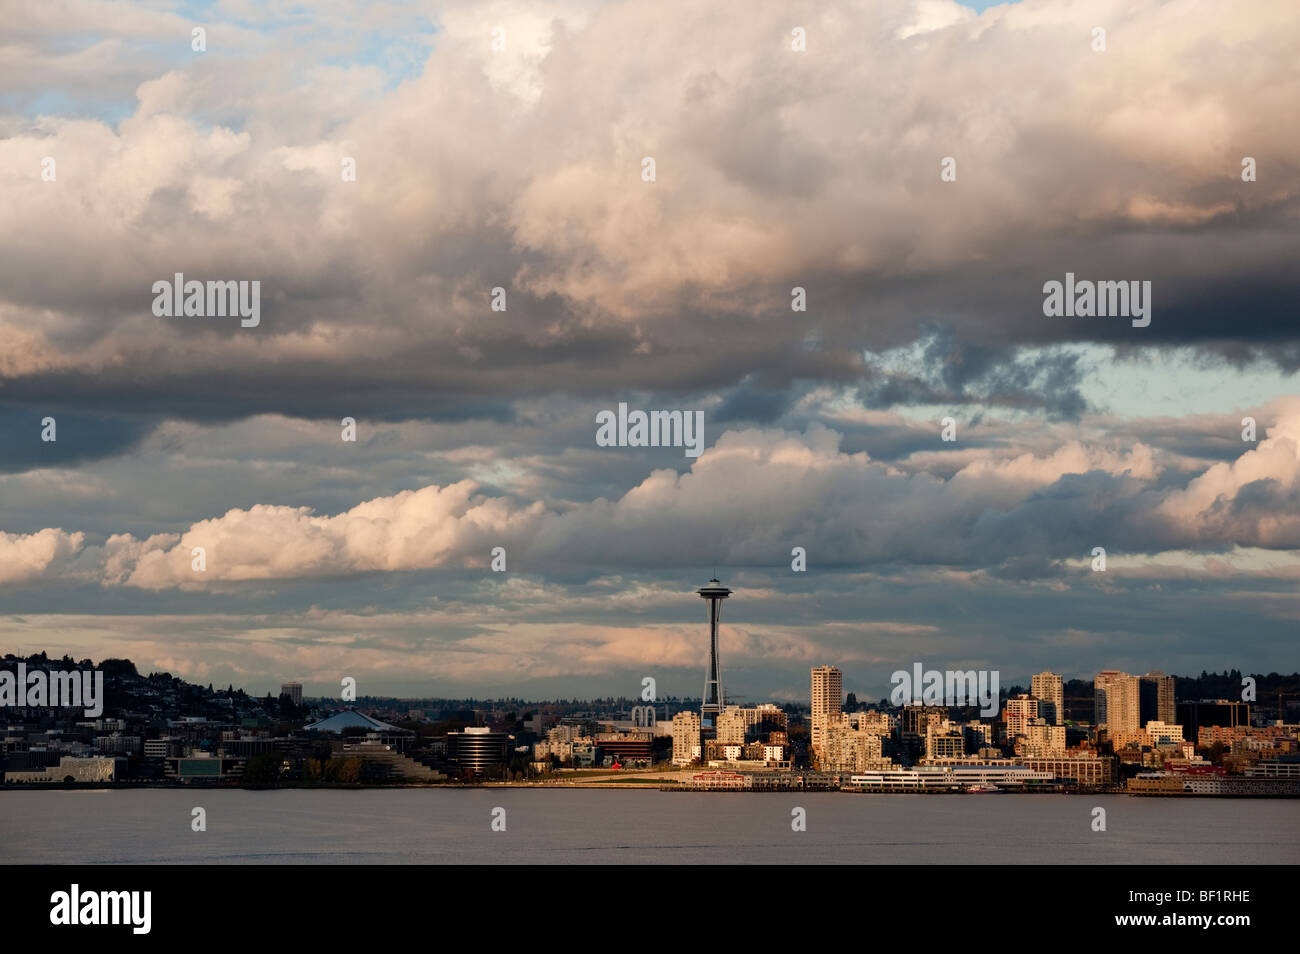 A dramatic sunset view of the Seattle, Washington skyline in Puget Sound and the Elliott Bay waterfront. Stock Photo